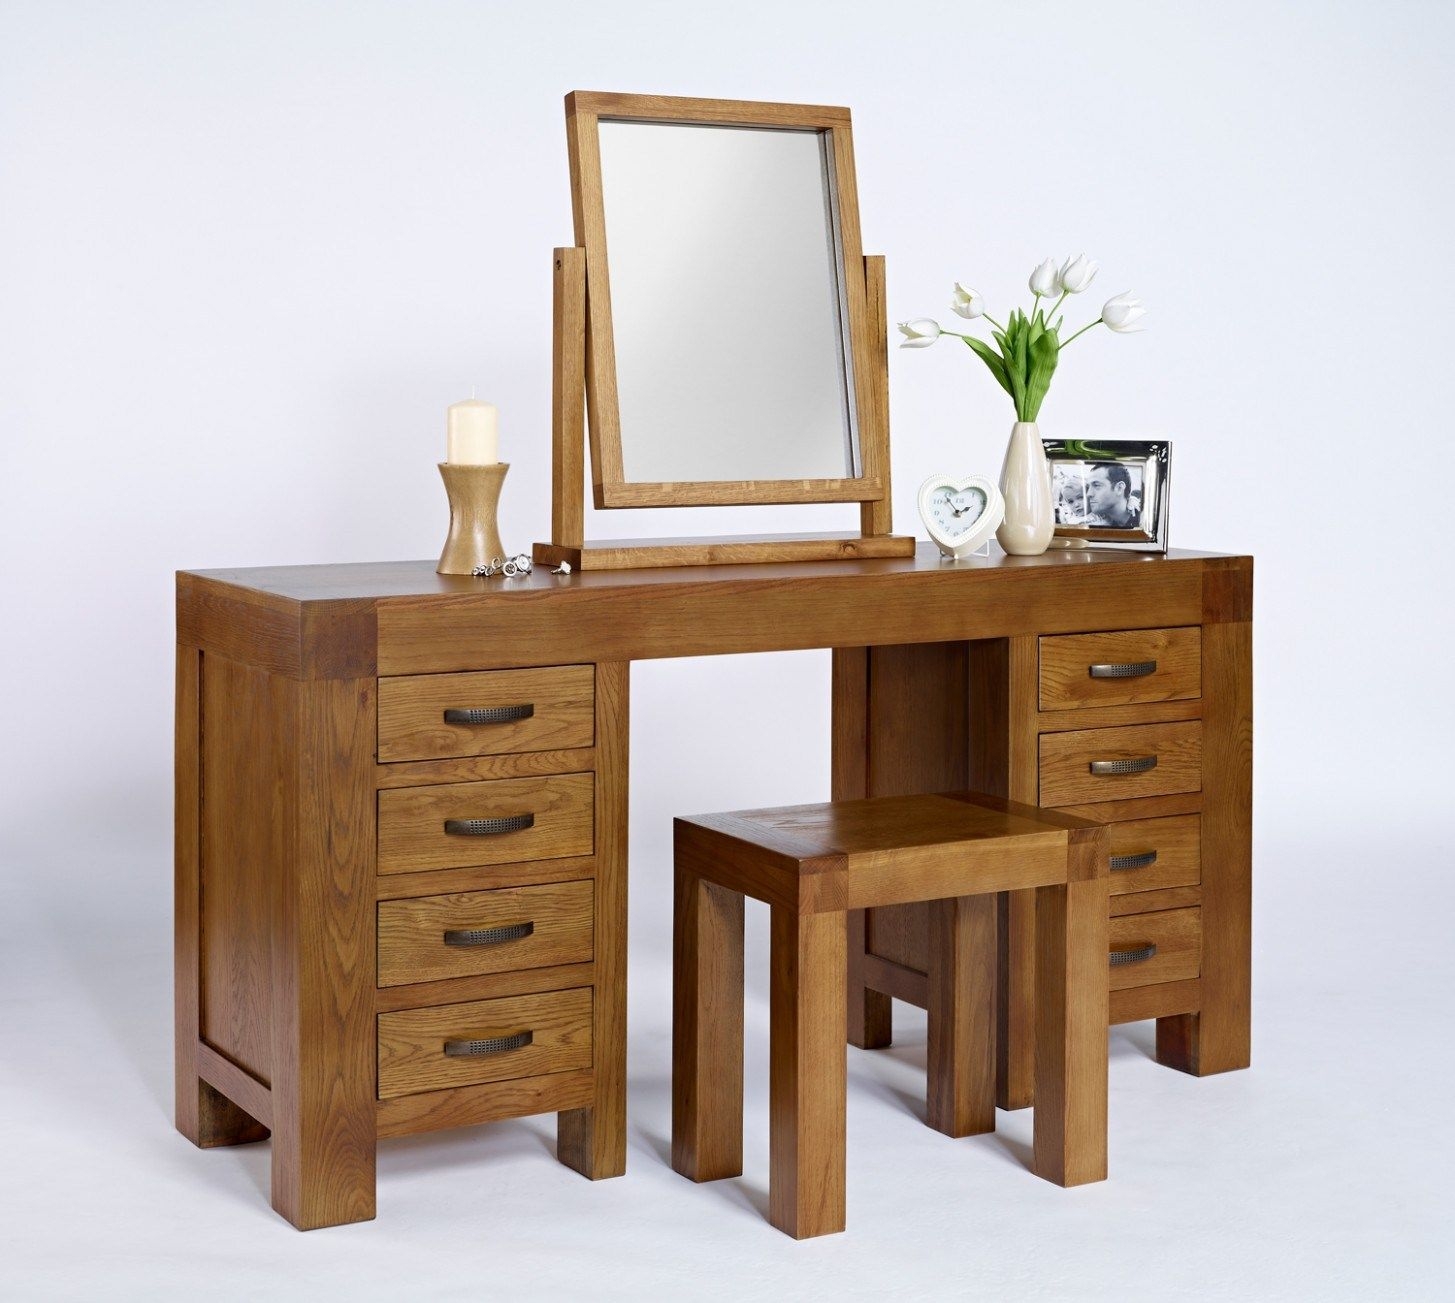 oak wood dressing table | Order At Finish Line | www.syncro-fvg.it